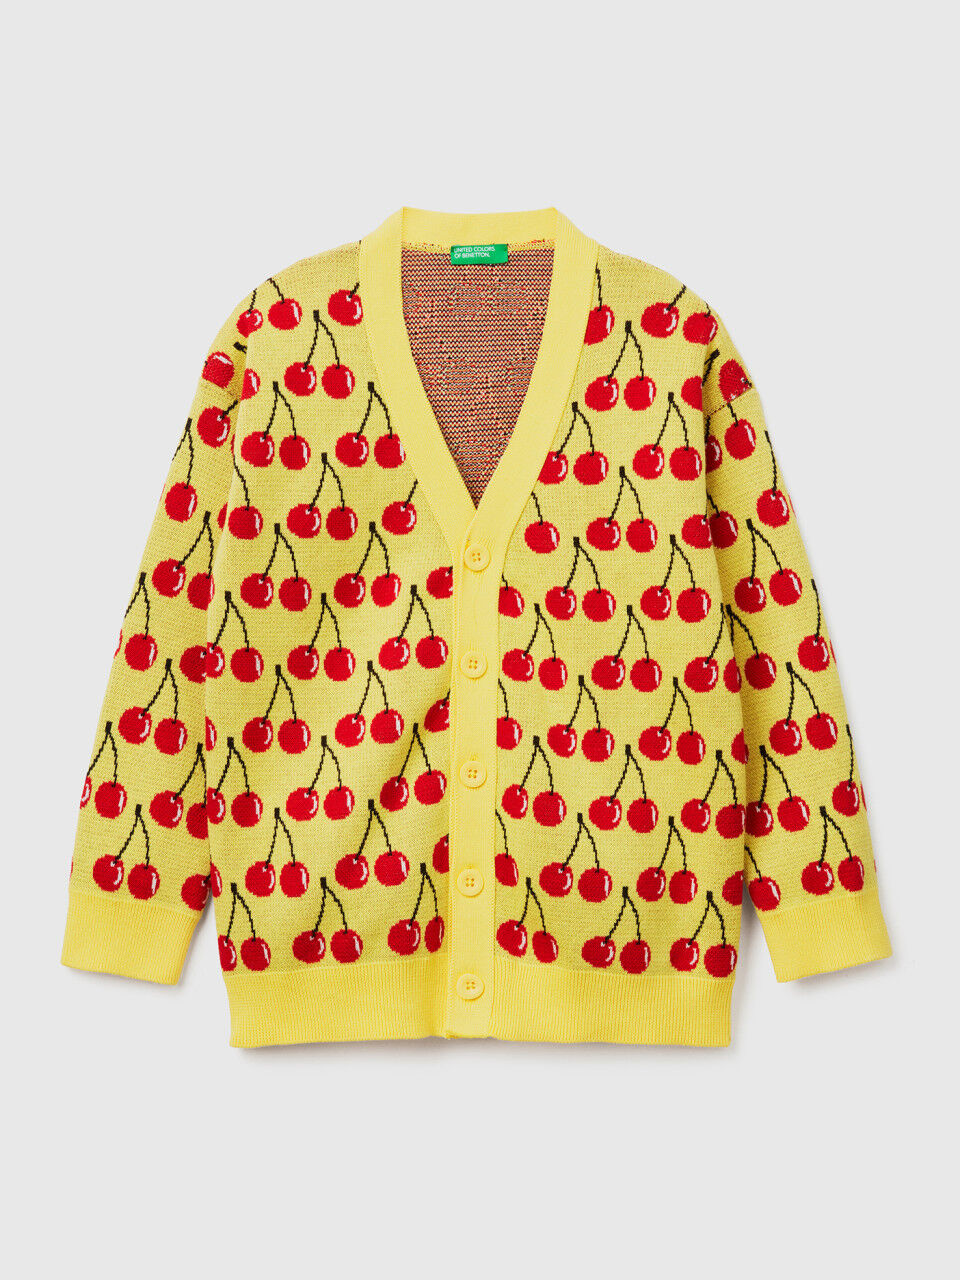 Yellow cardigan with cherry pattern